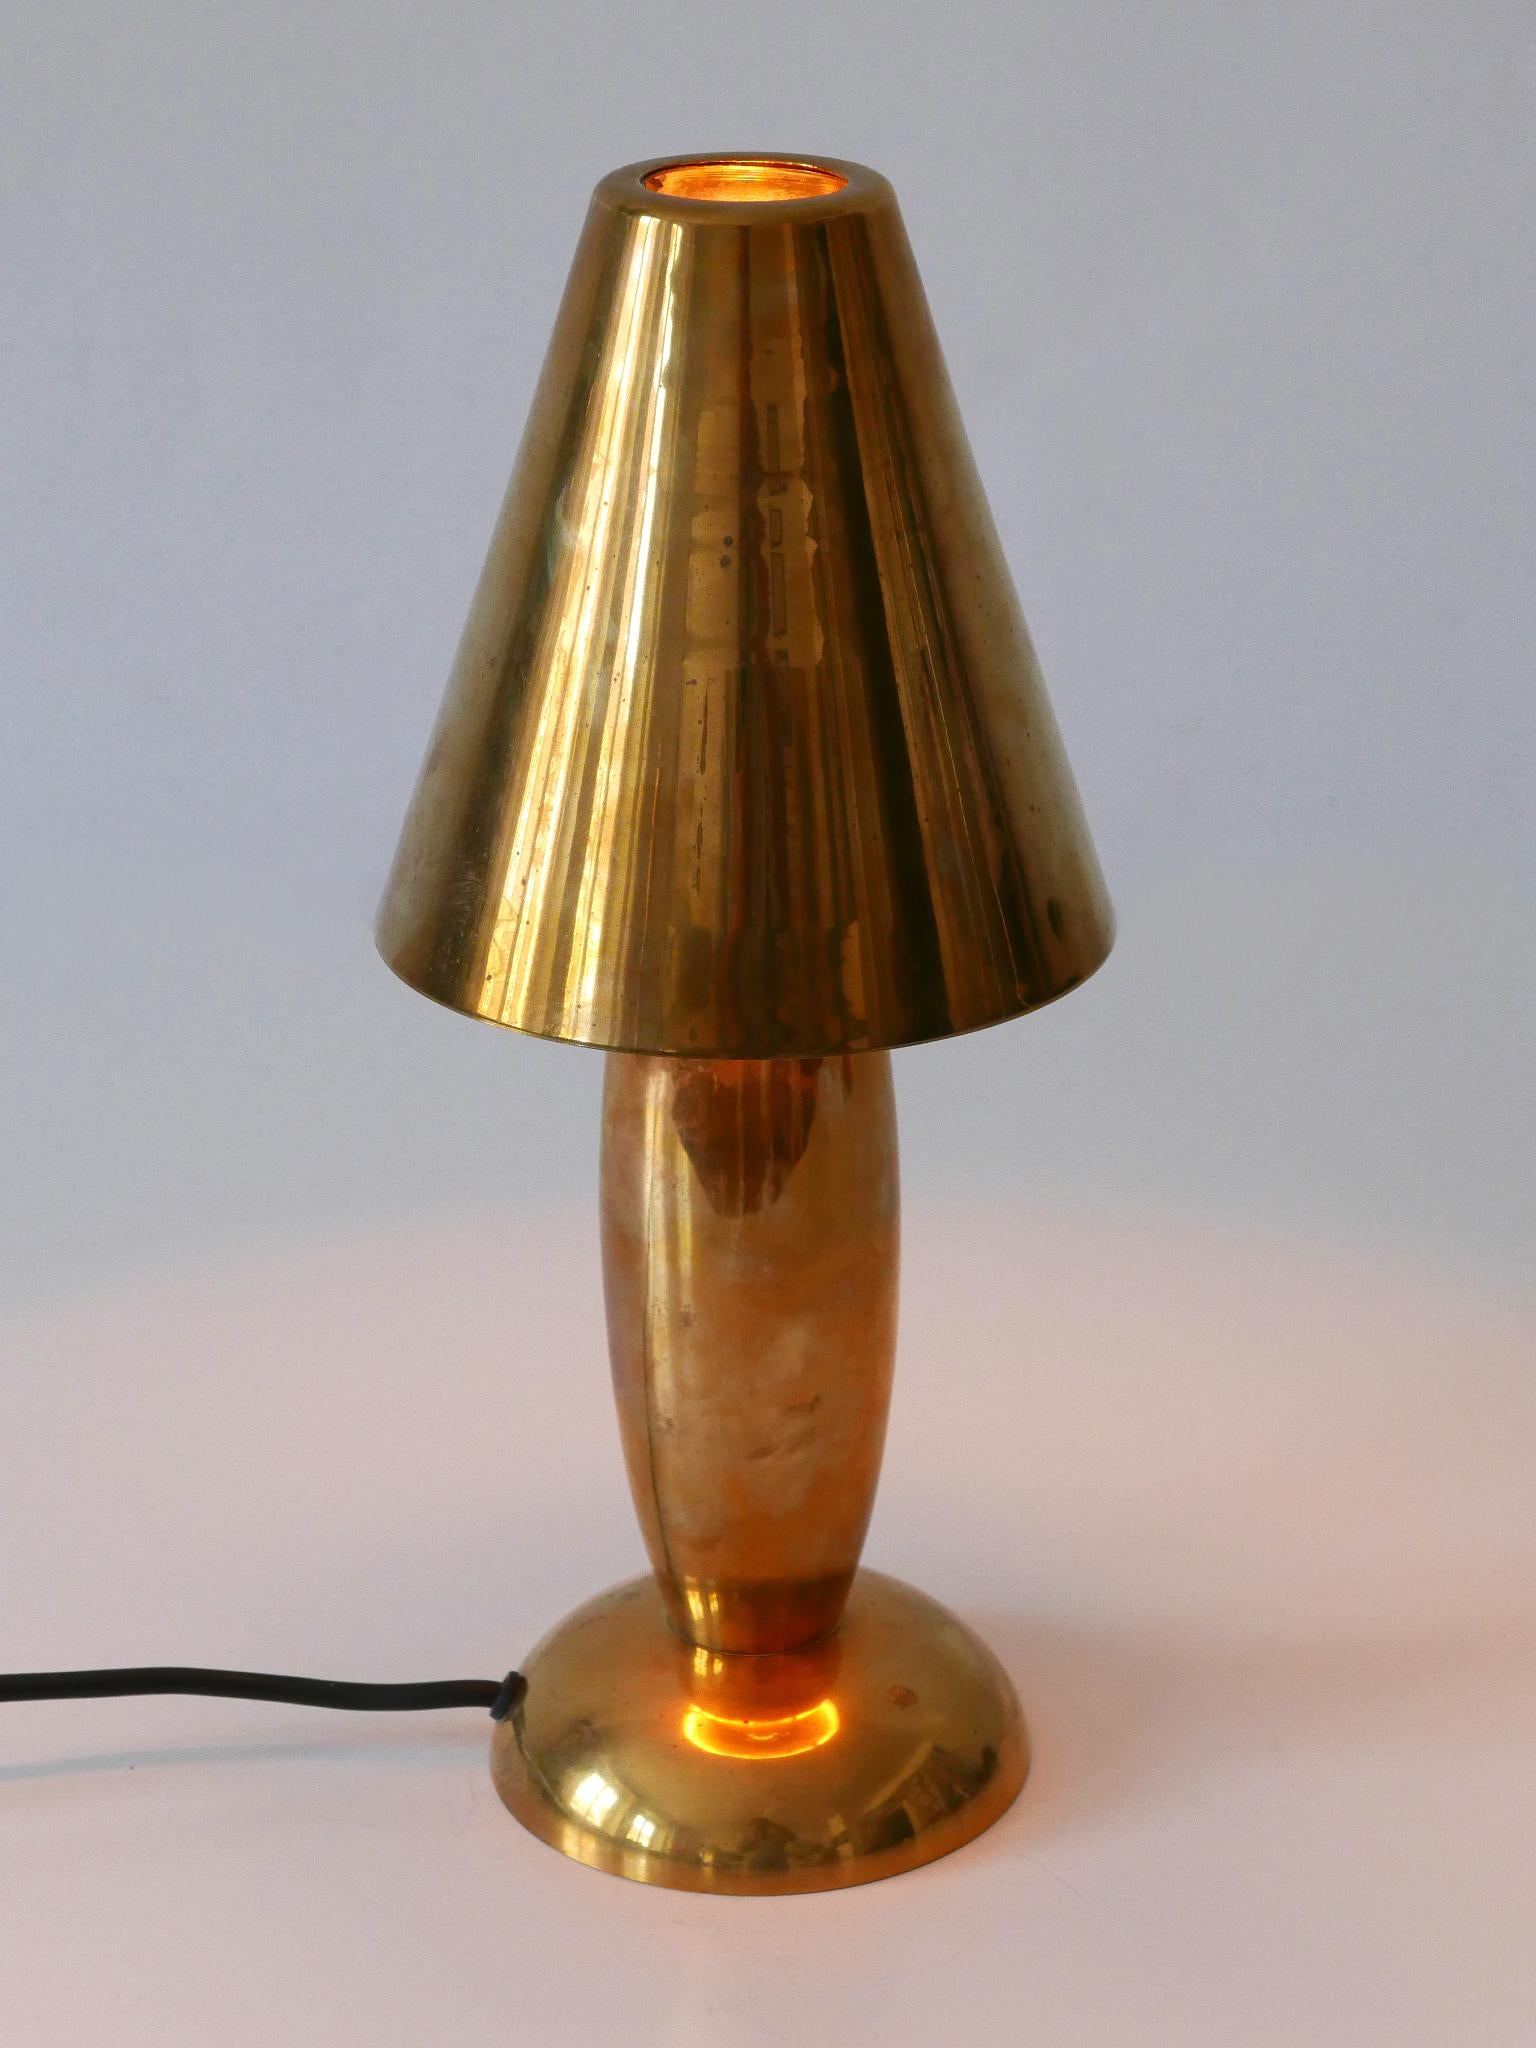 Rare & Lovely Mid-Century Modern Brass Side Table Lamp by Lambert Germany 1970s For Sale 8